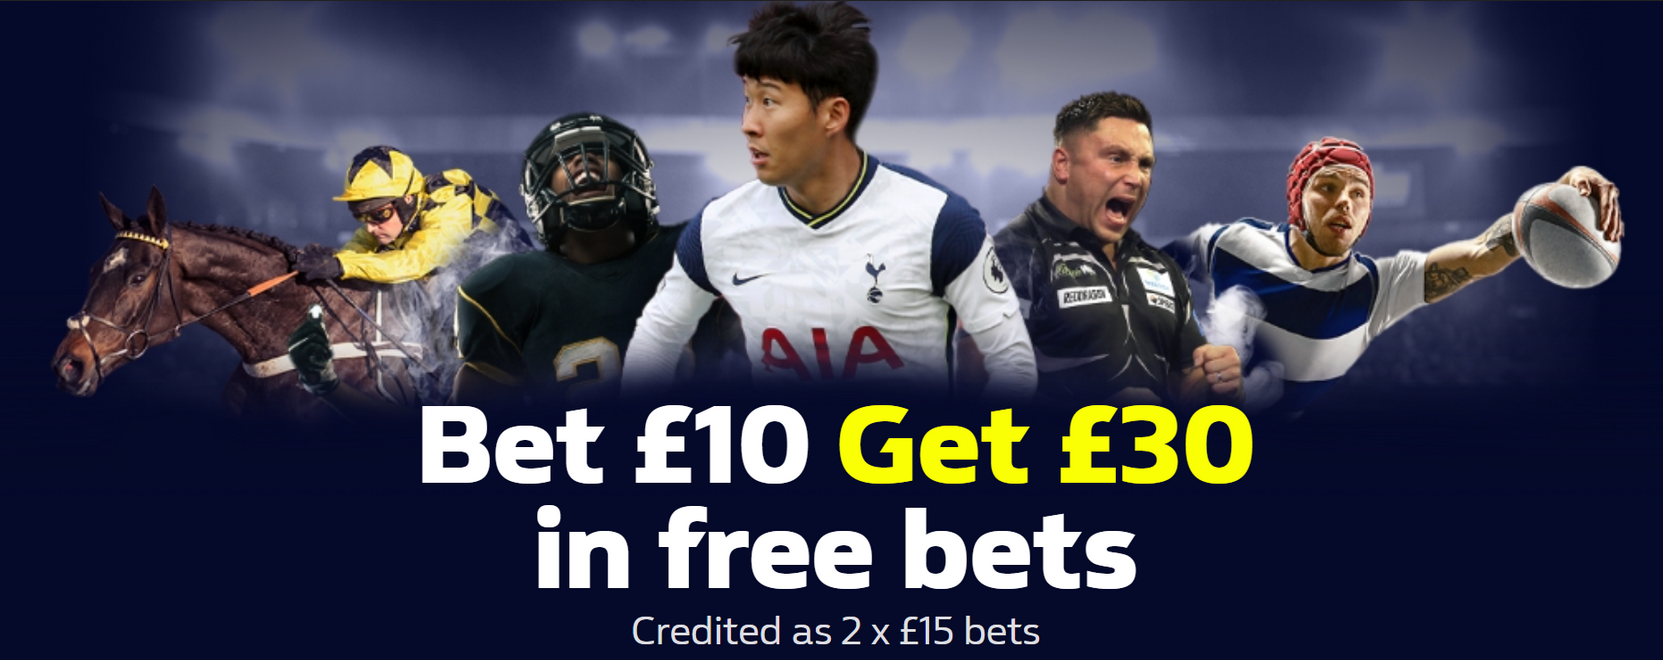 An image of the William Hill sportsbook bet 10 get 30 promo offer